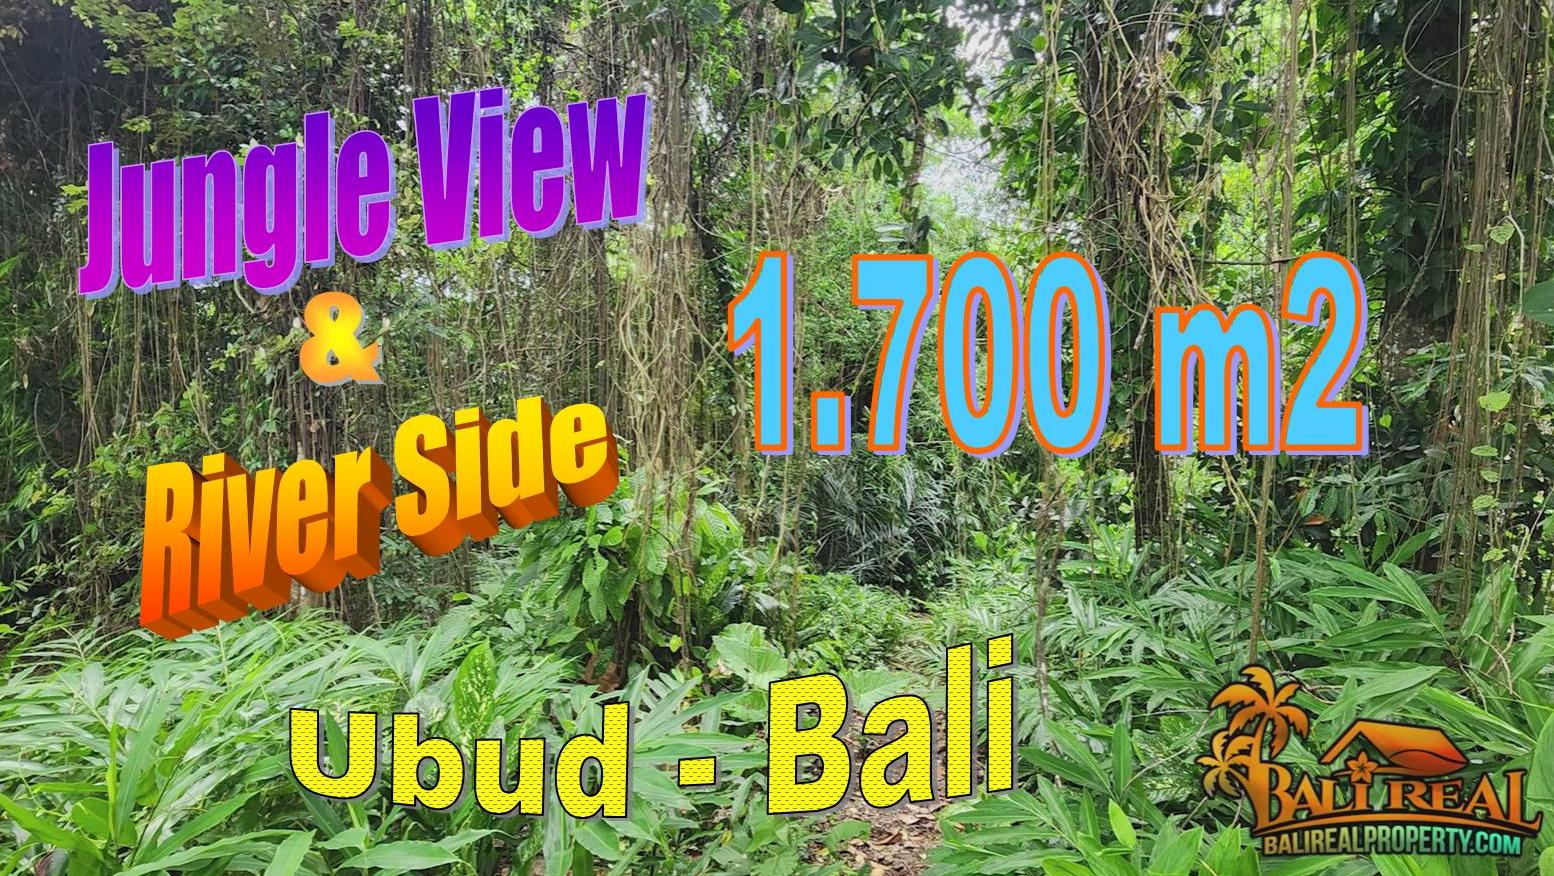 Cheap property 1,700 m2 LAND for SALE in UBUD TJUB856